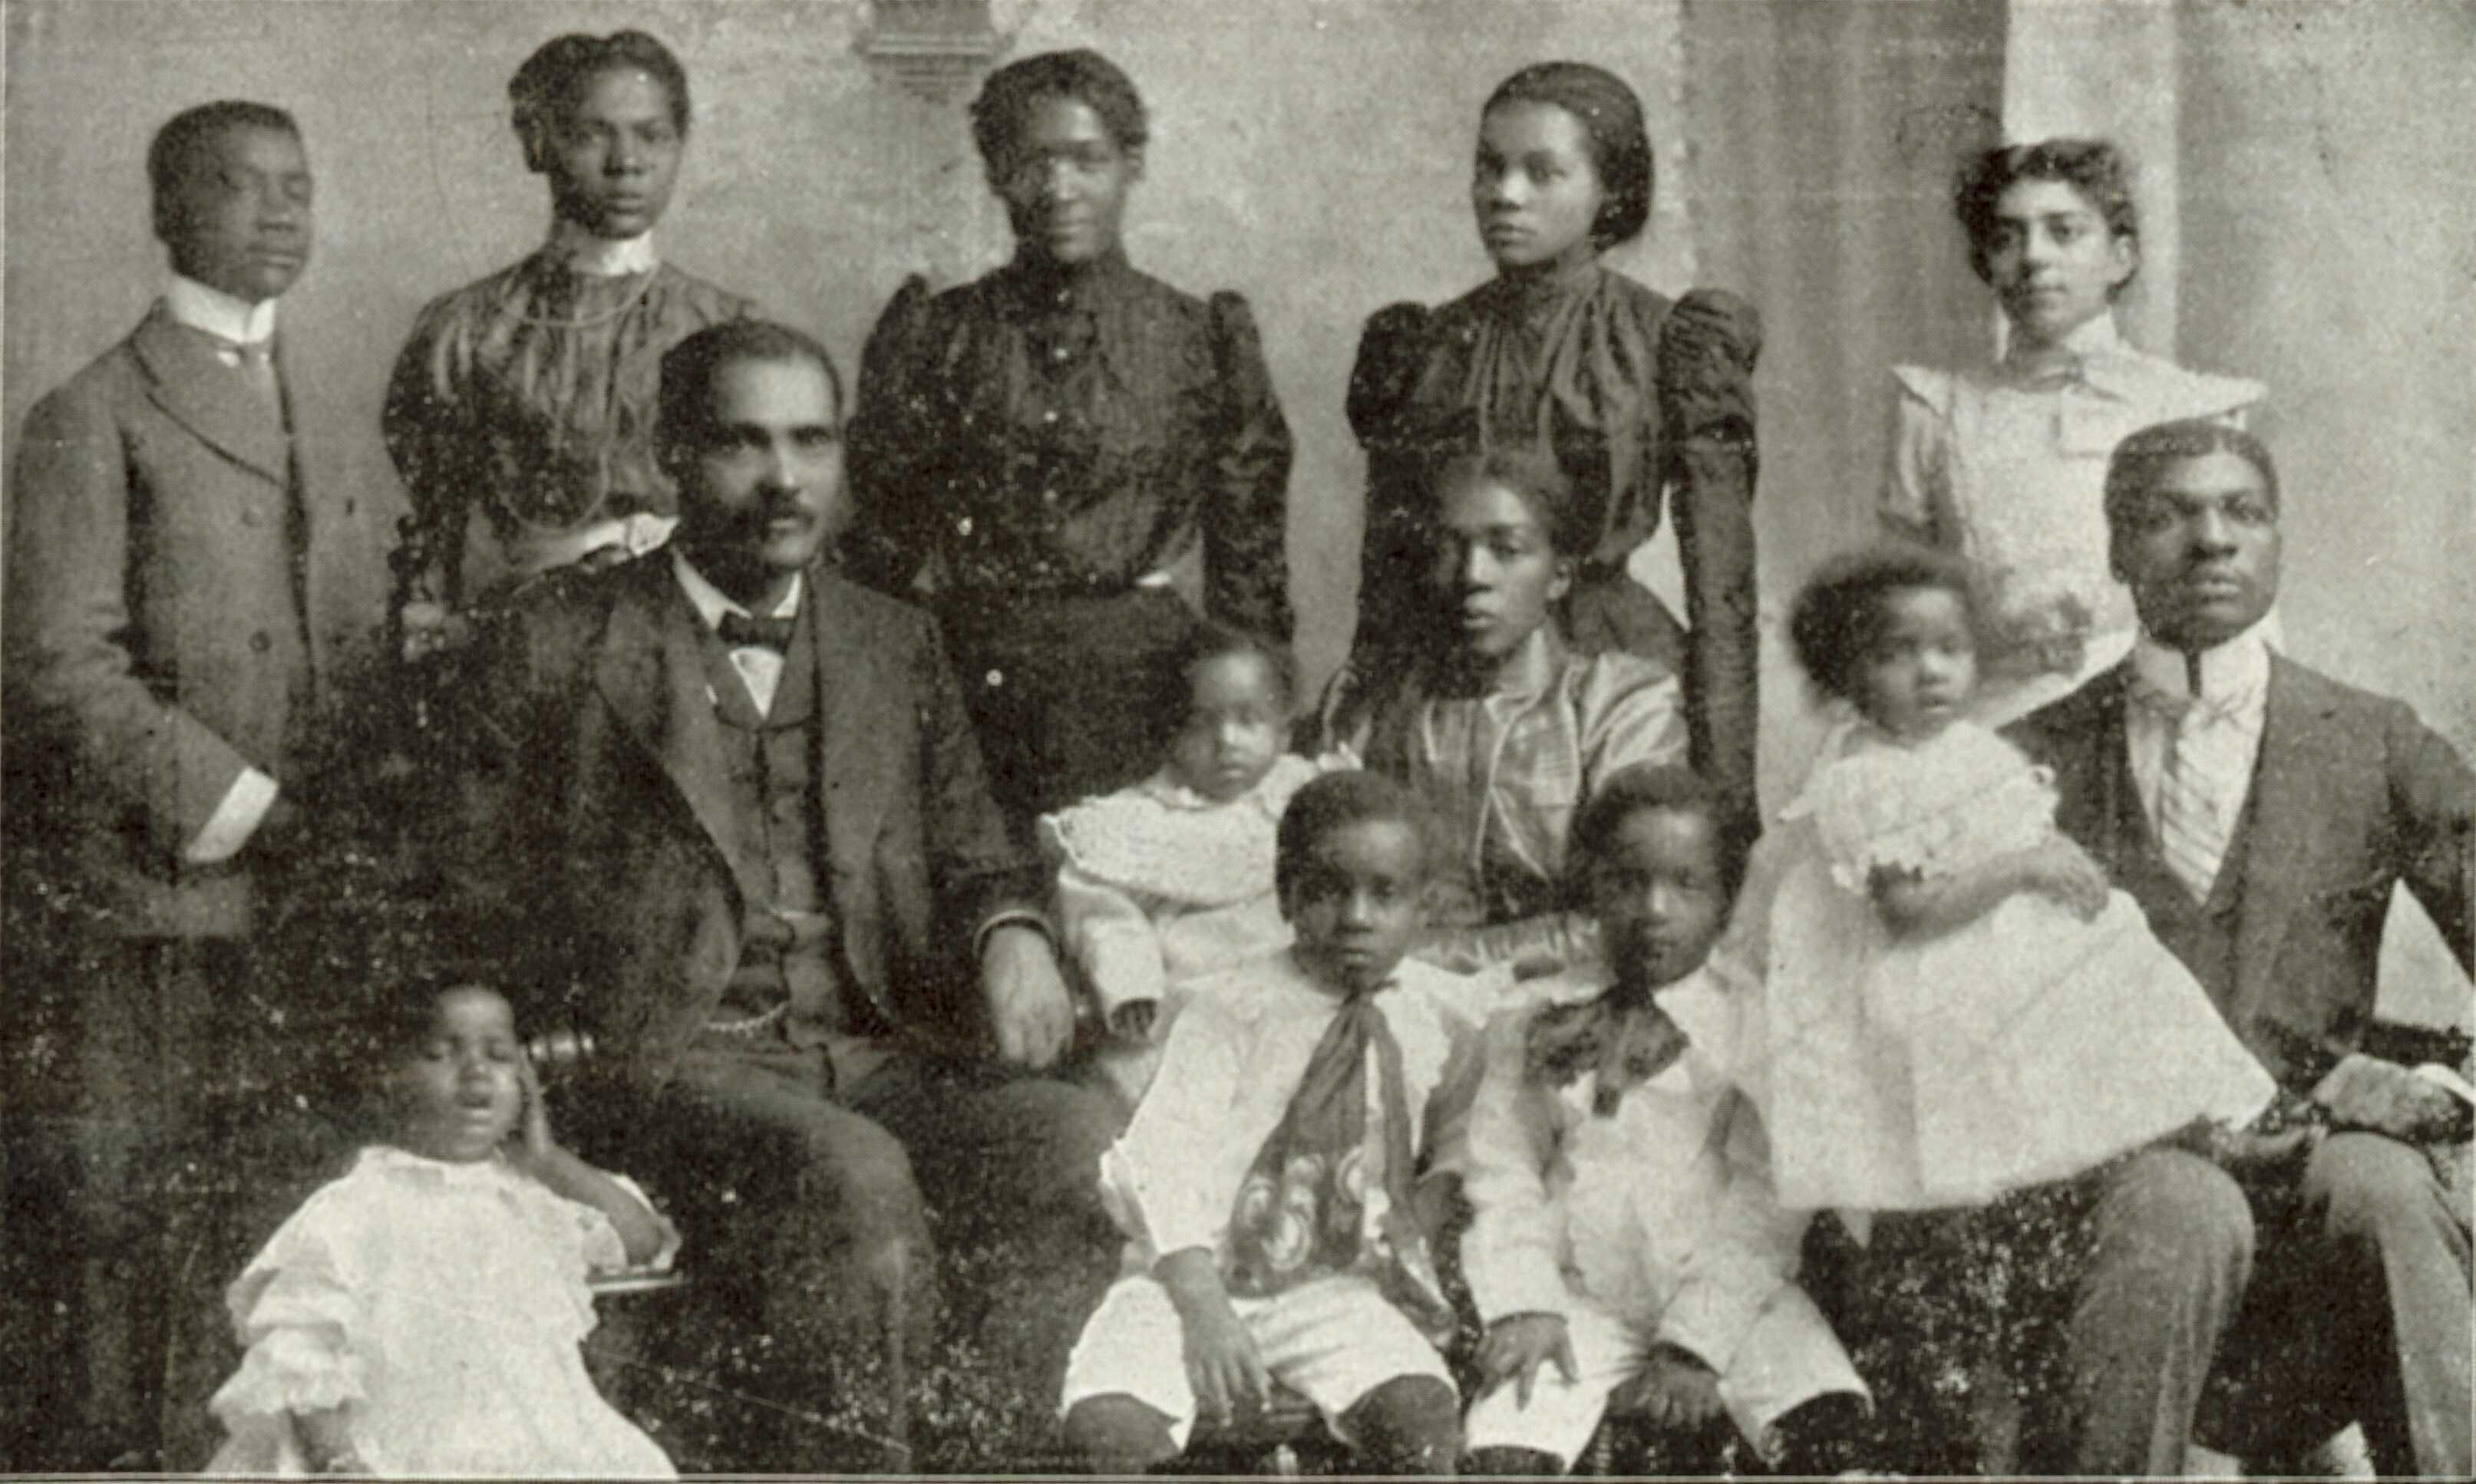 Portrait of R. H. Boyd and Family in the 1890s